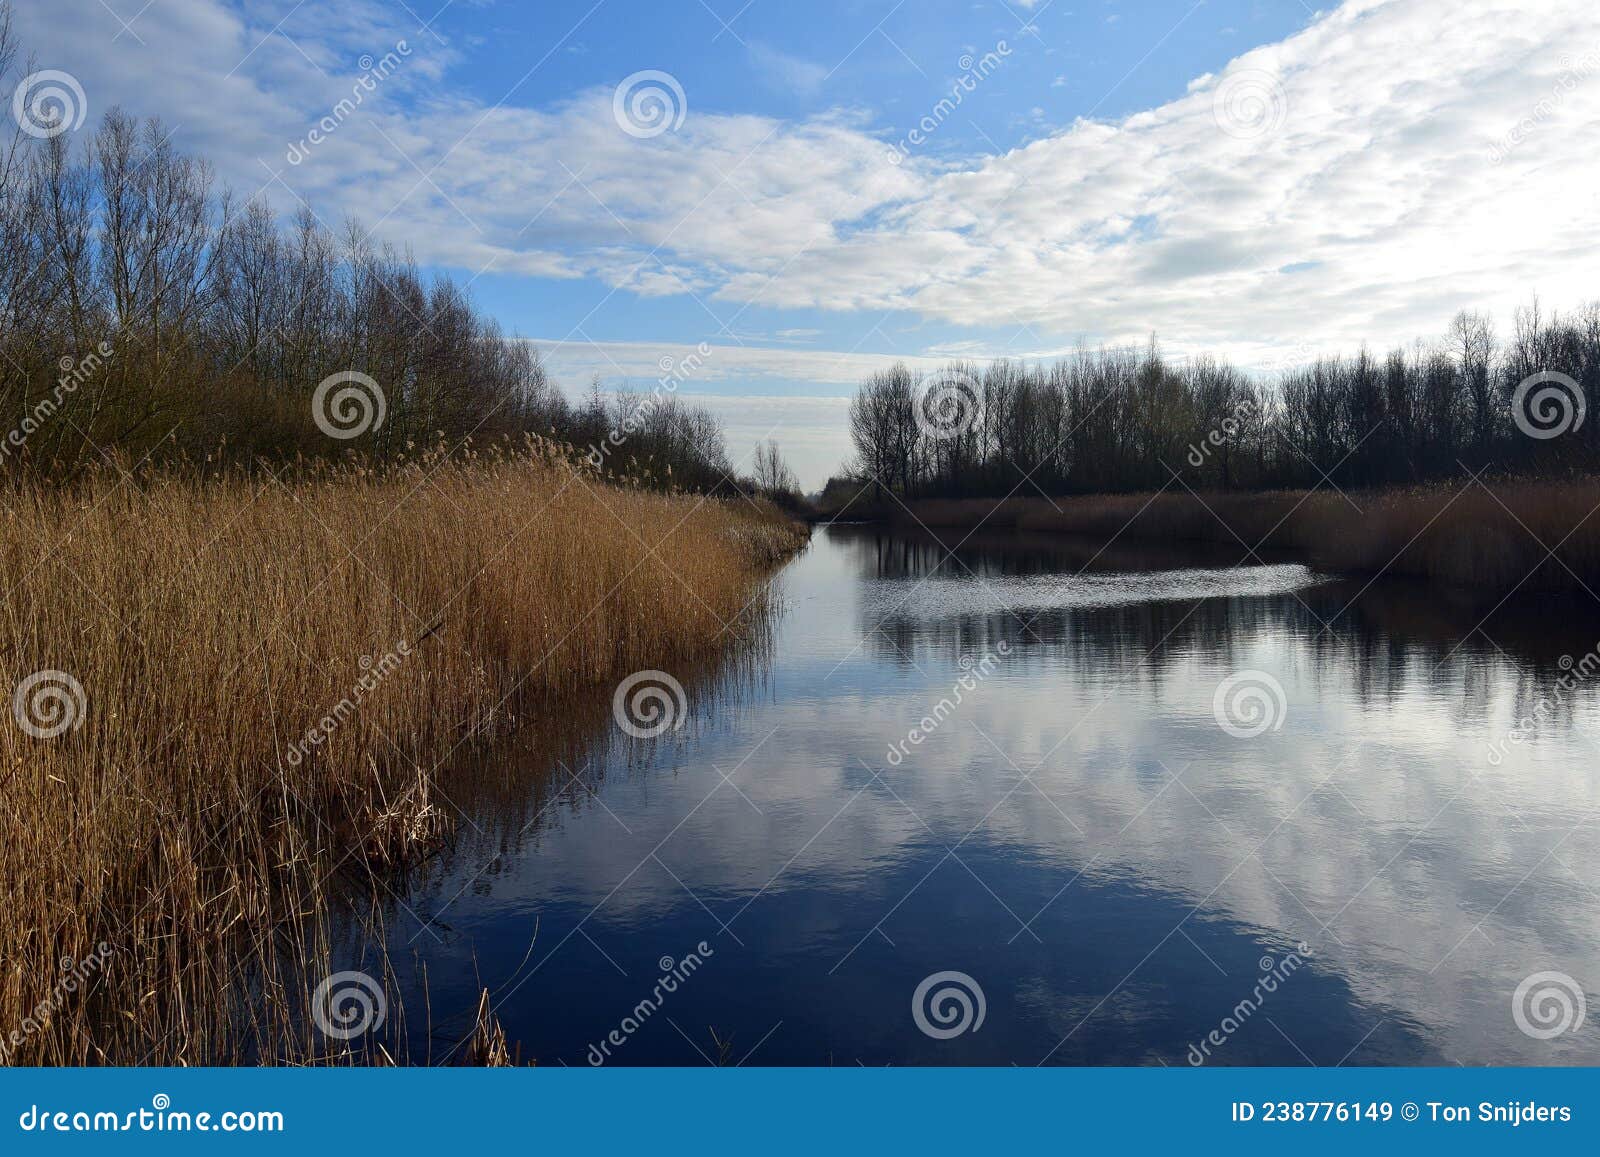 reeds in the balijbos, zoetermeer nl can form entire collars along waterfronts.